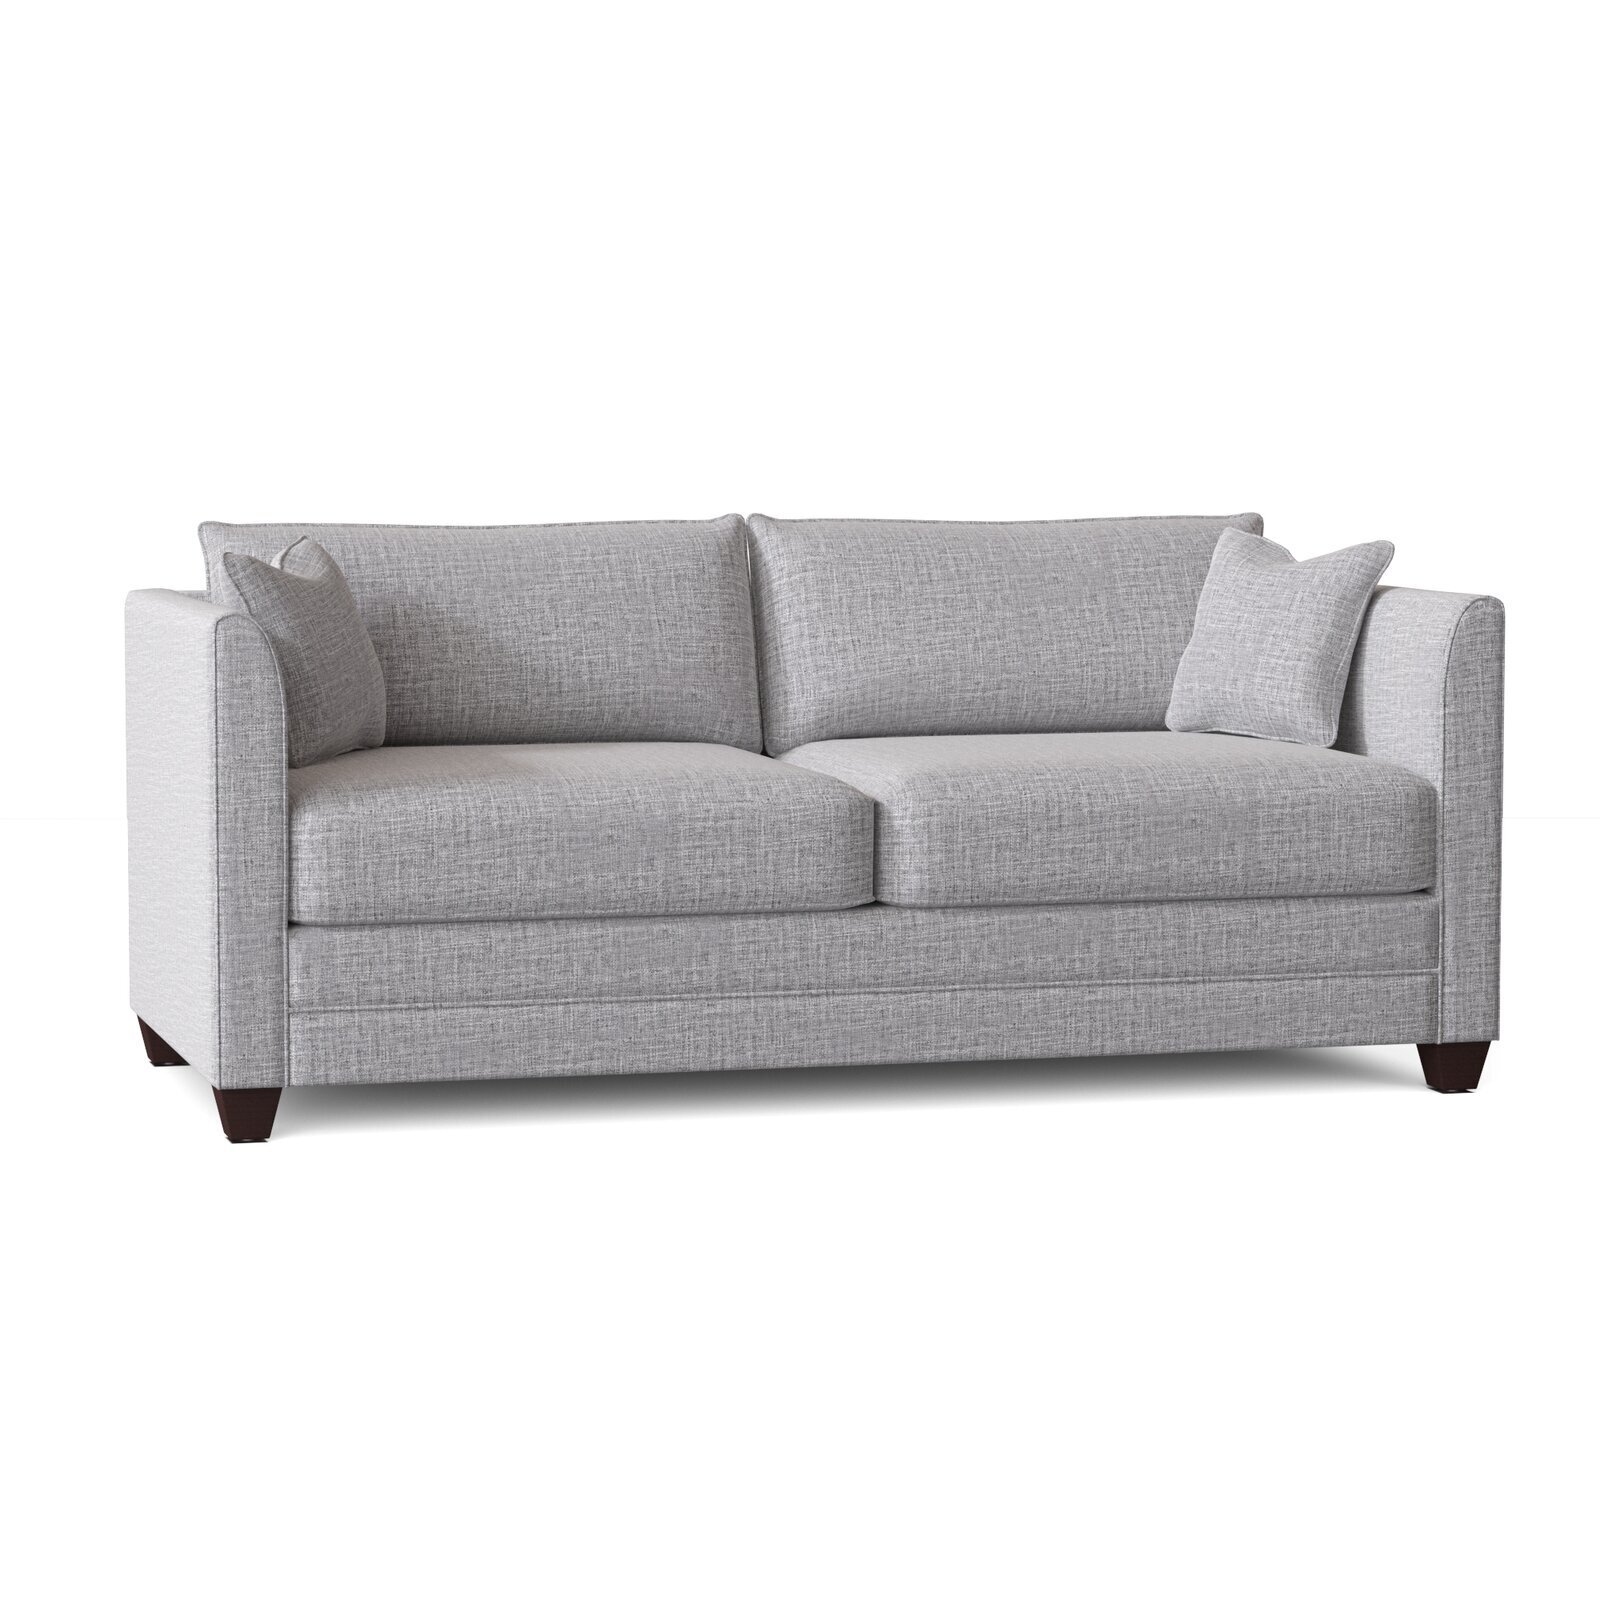 Square Arm Fold Down Couch 